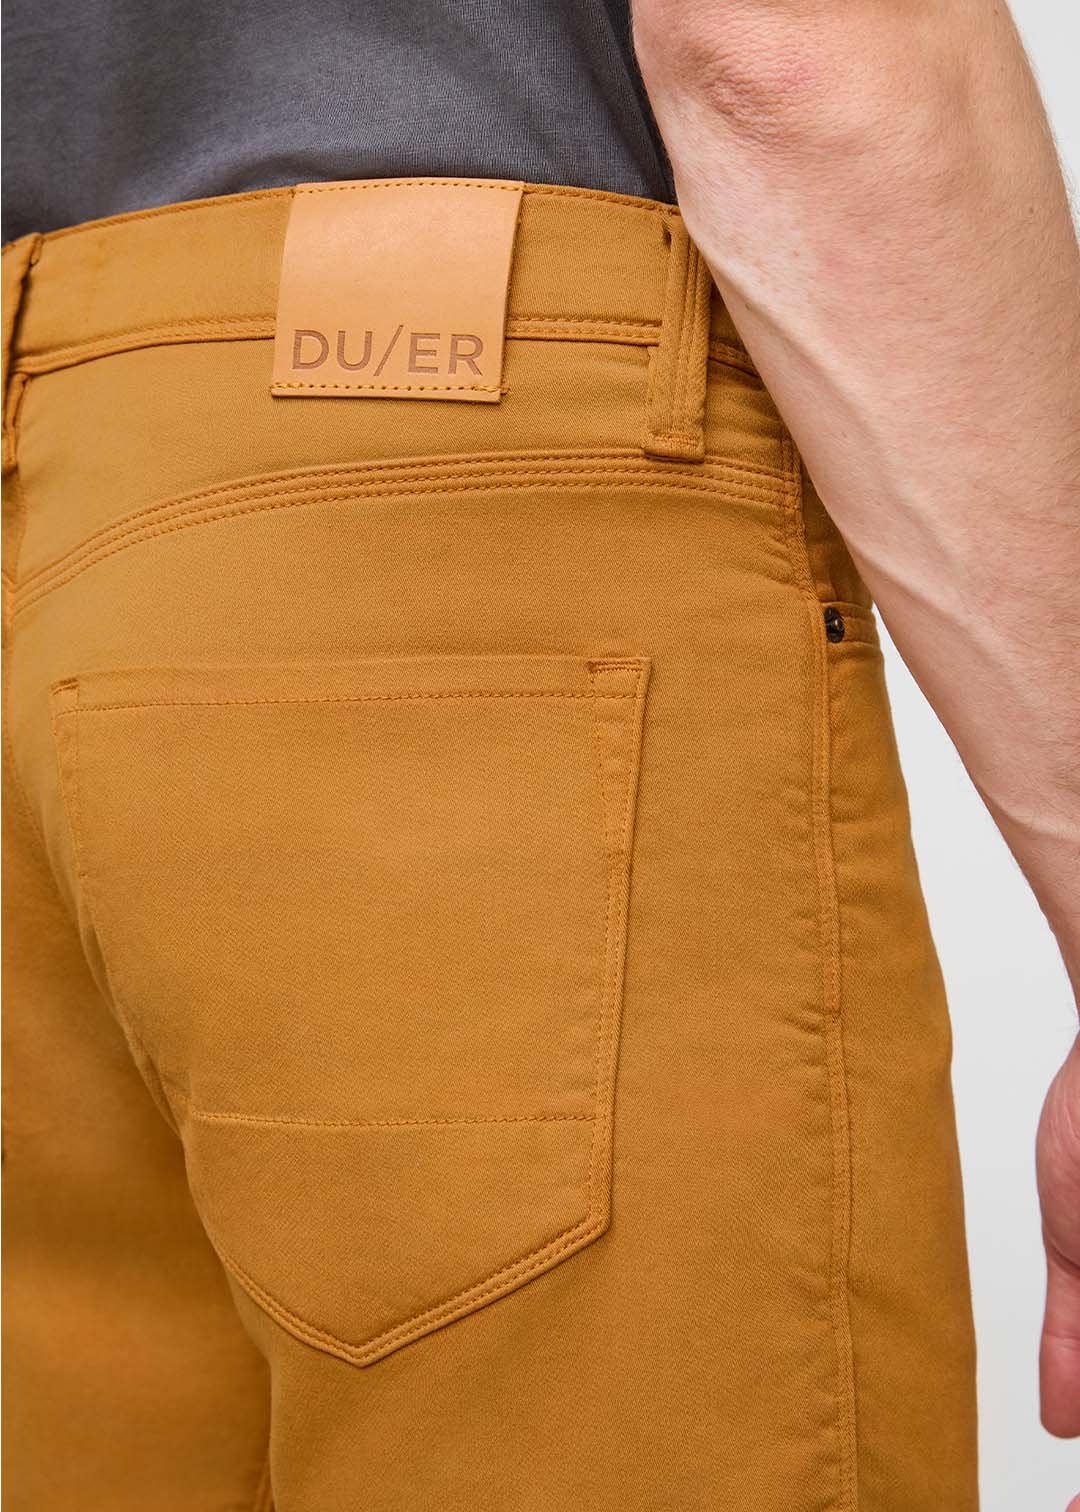 mens yellow slim fit performance short back pocket and patch